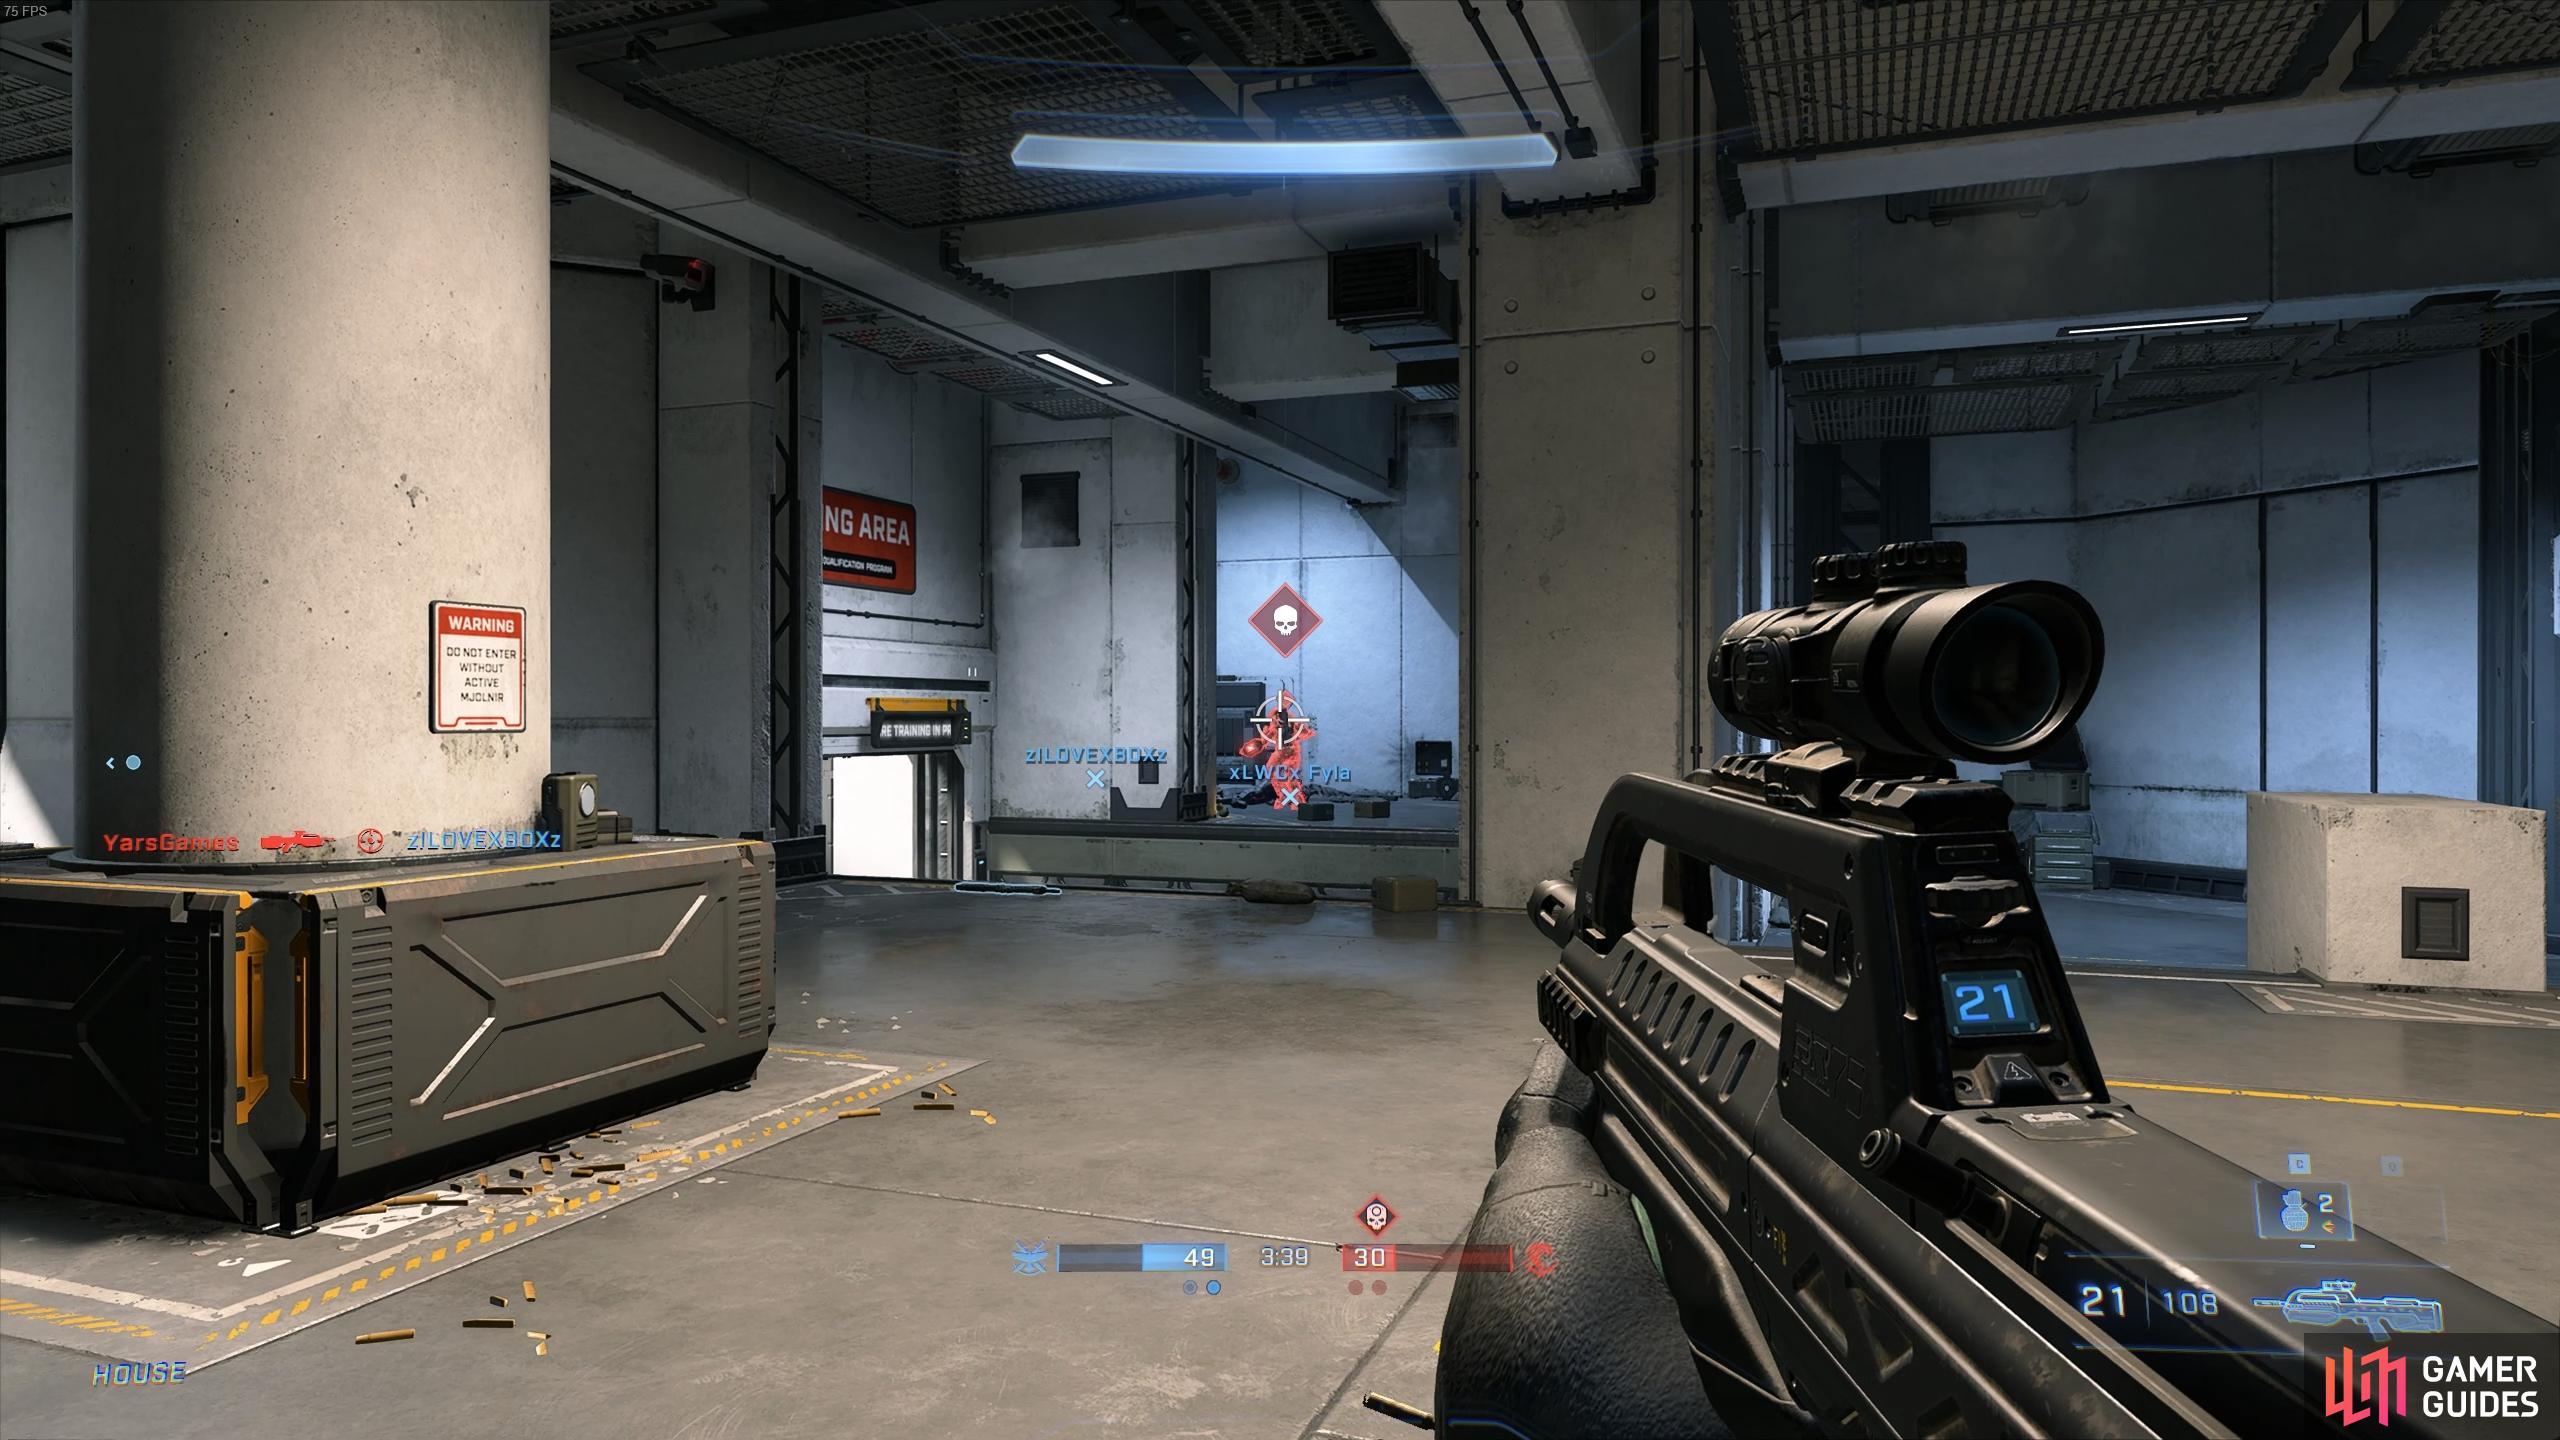 You'll be able to see the ball icon regardless of where it is, even behind walls when the enemy has it.